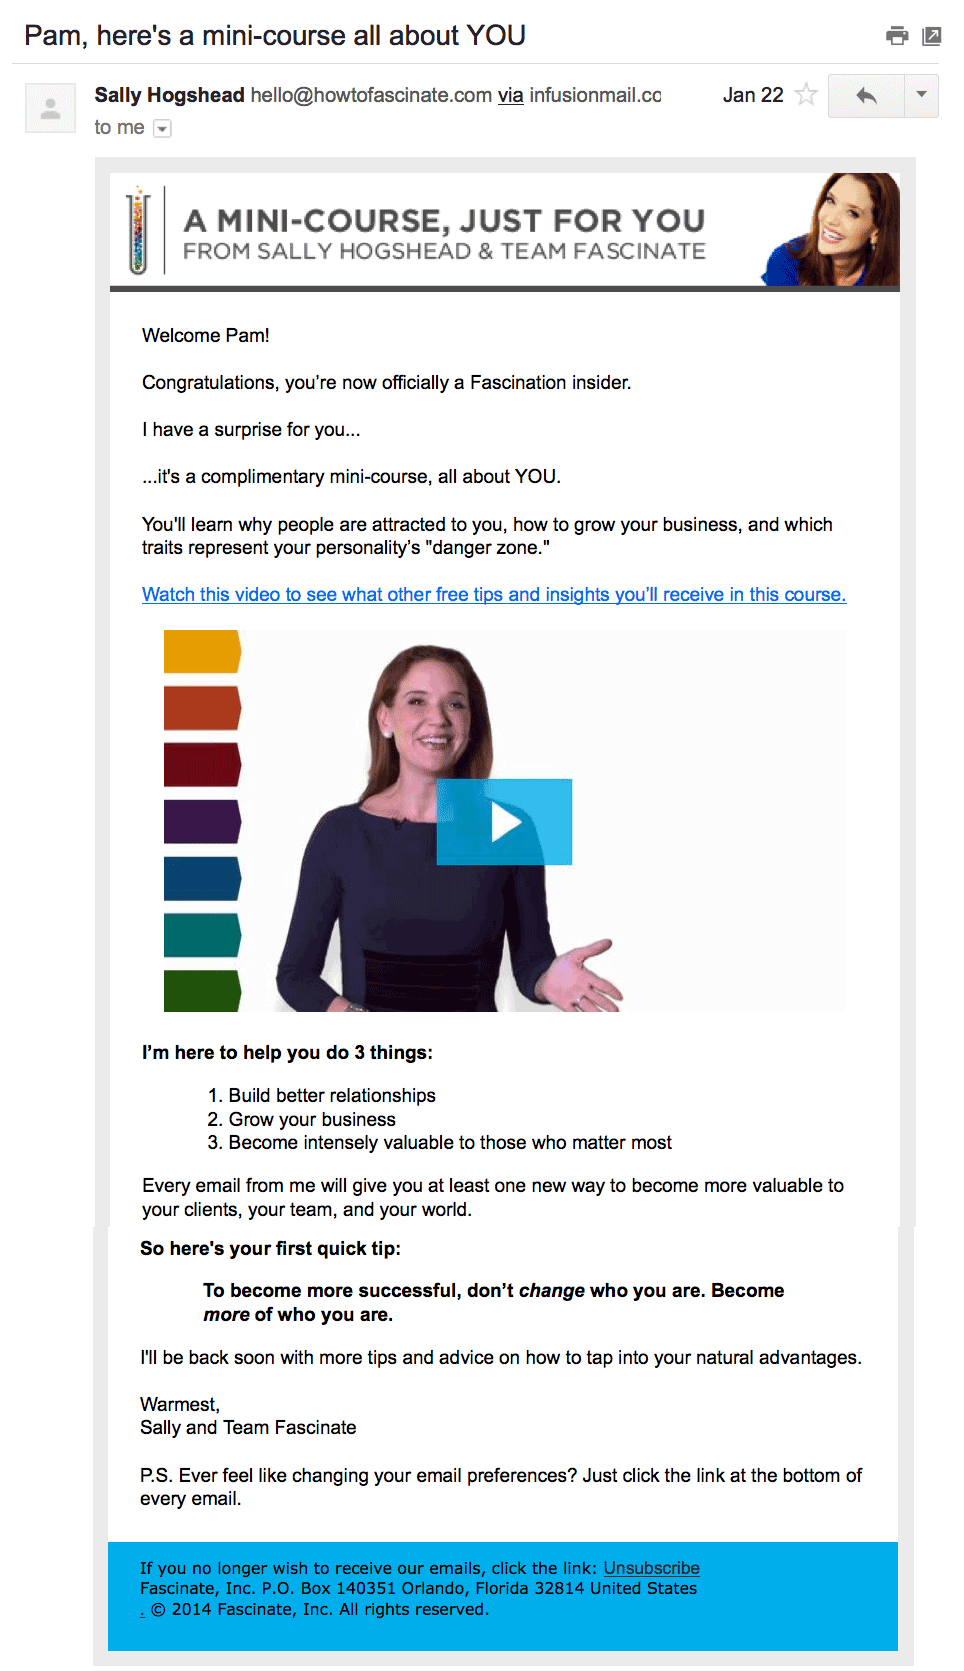 another example of what looks like a video in an email, but is actually an image